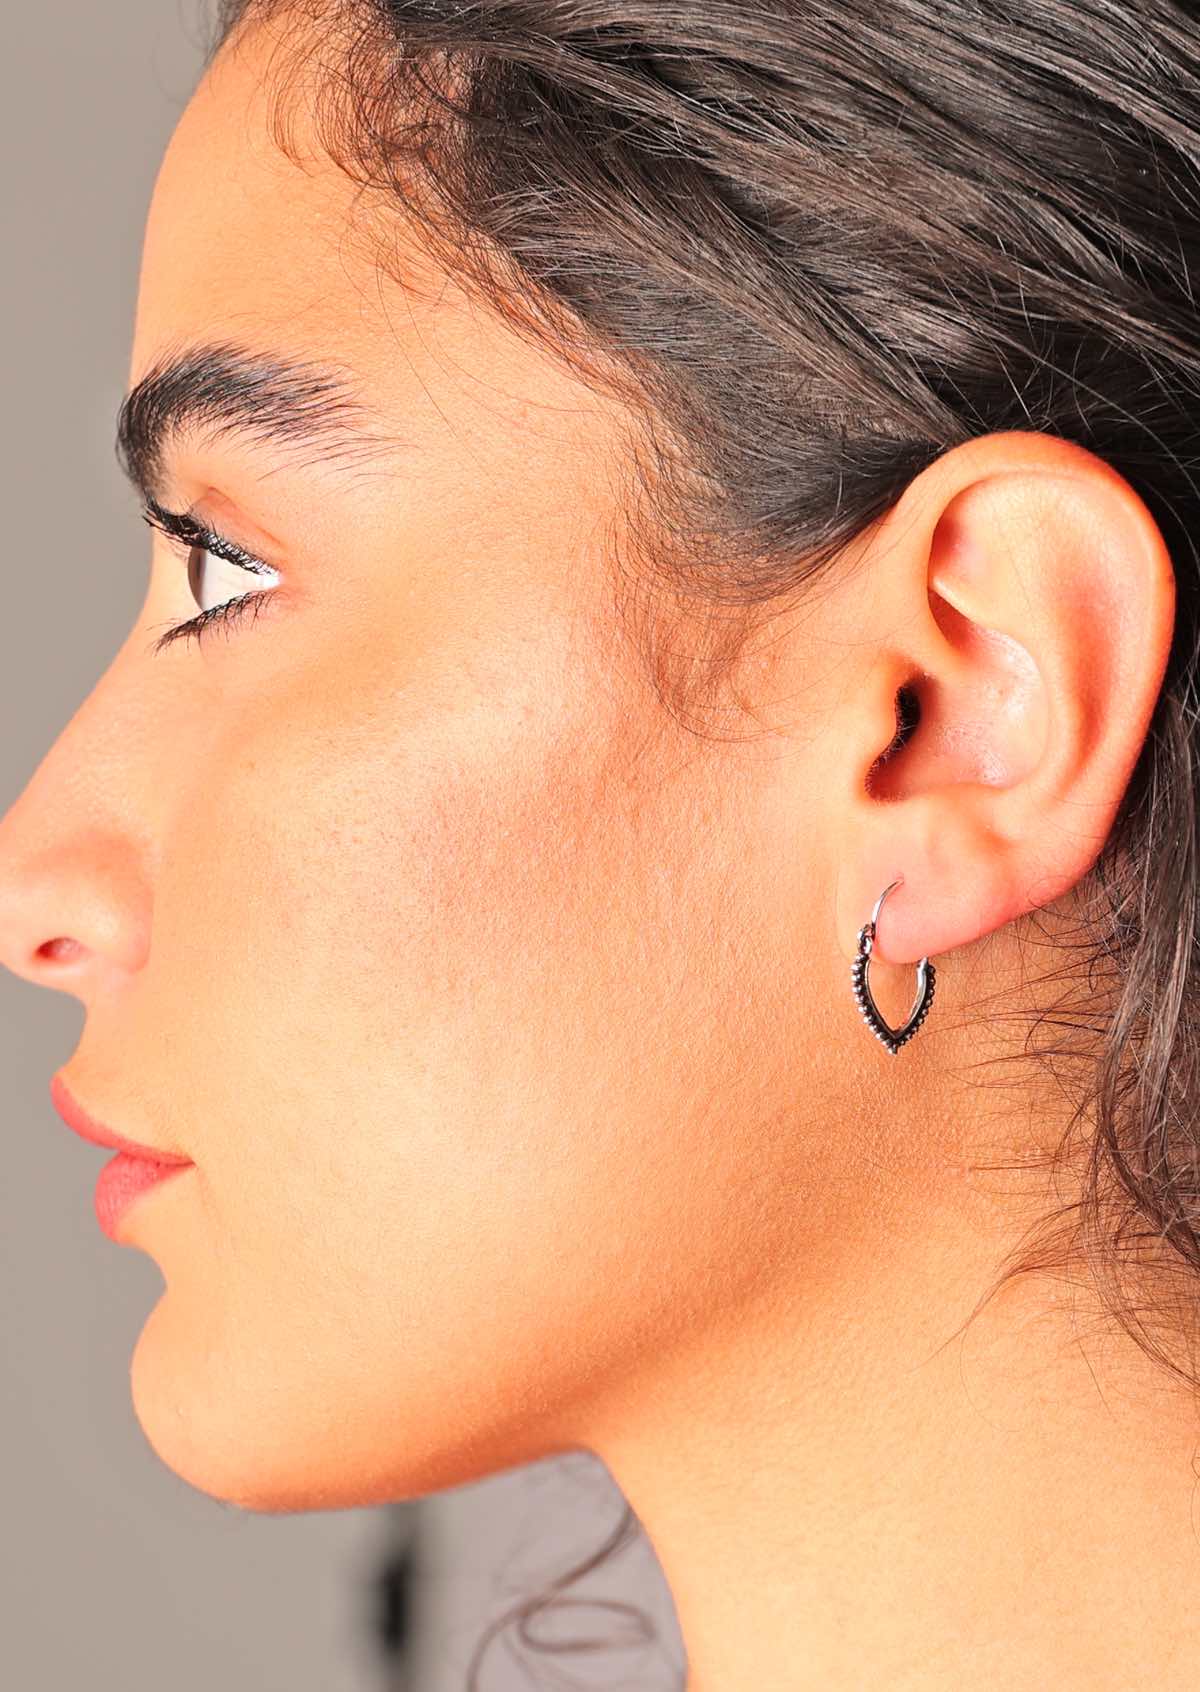 These sterling silver hoops form a Reuleaux triangle shape with silver beading along the outer edge